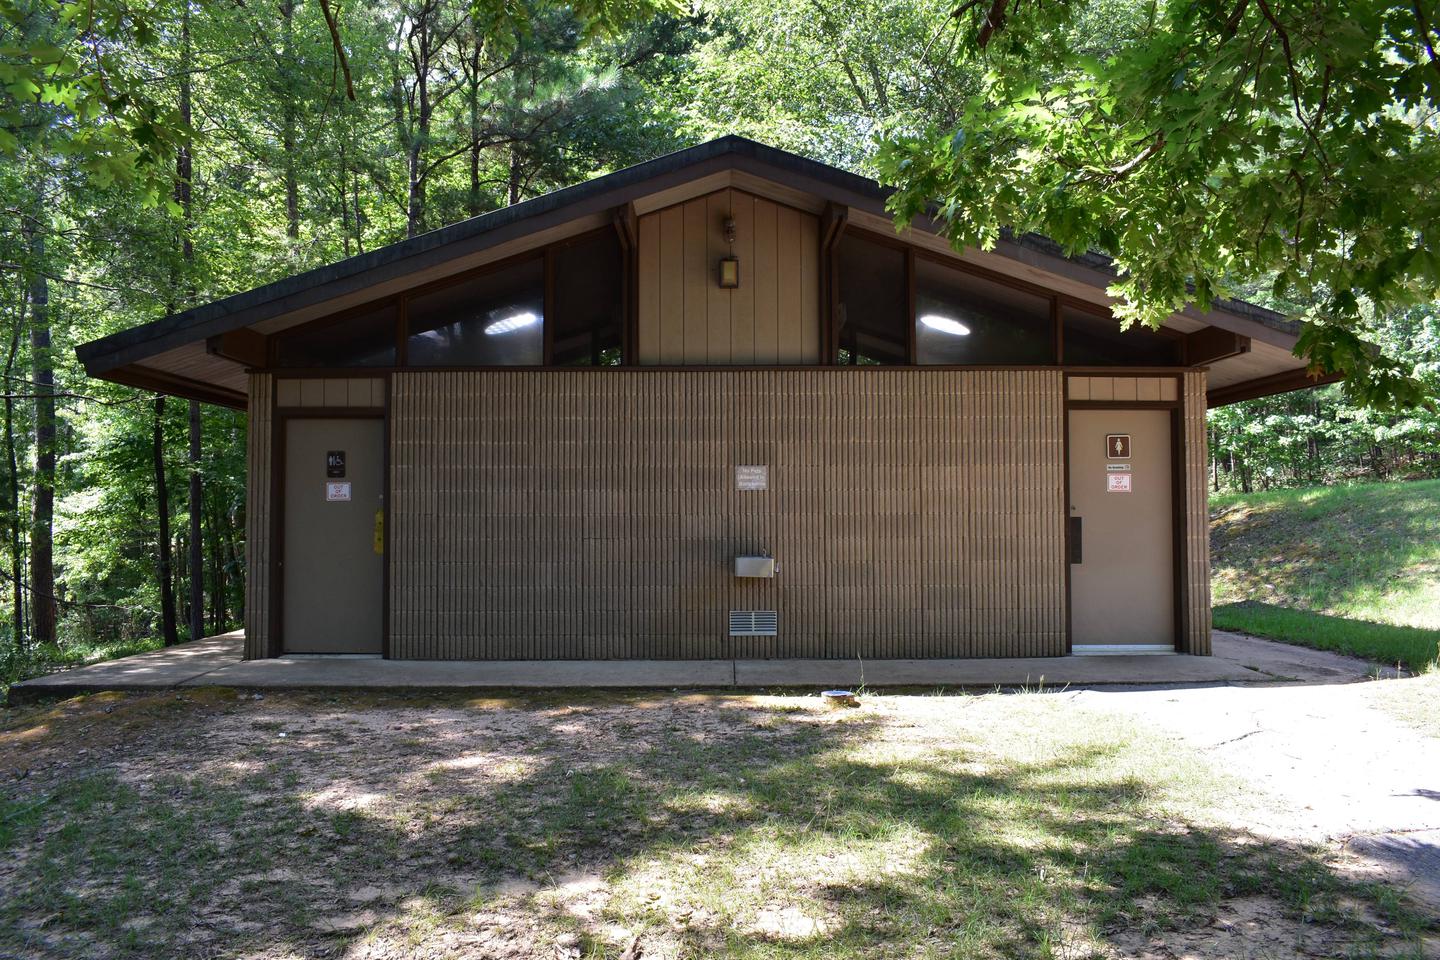 Clear Creek Day Use Area Oak Leaf Shelter3Clear Creek Day Use Area Oak Leaf Shelter Rest Rooms
July 10th, 2019